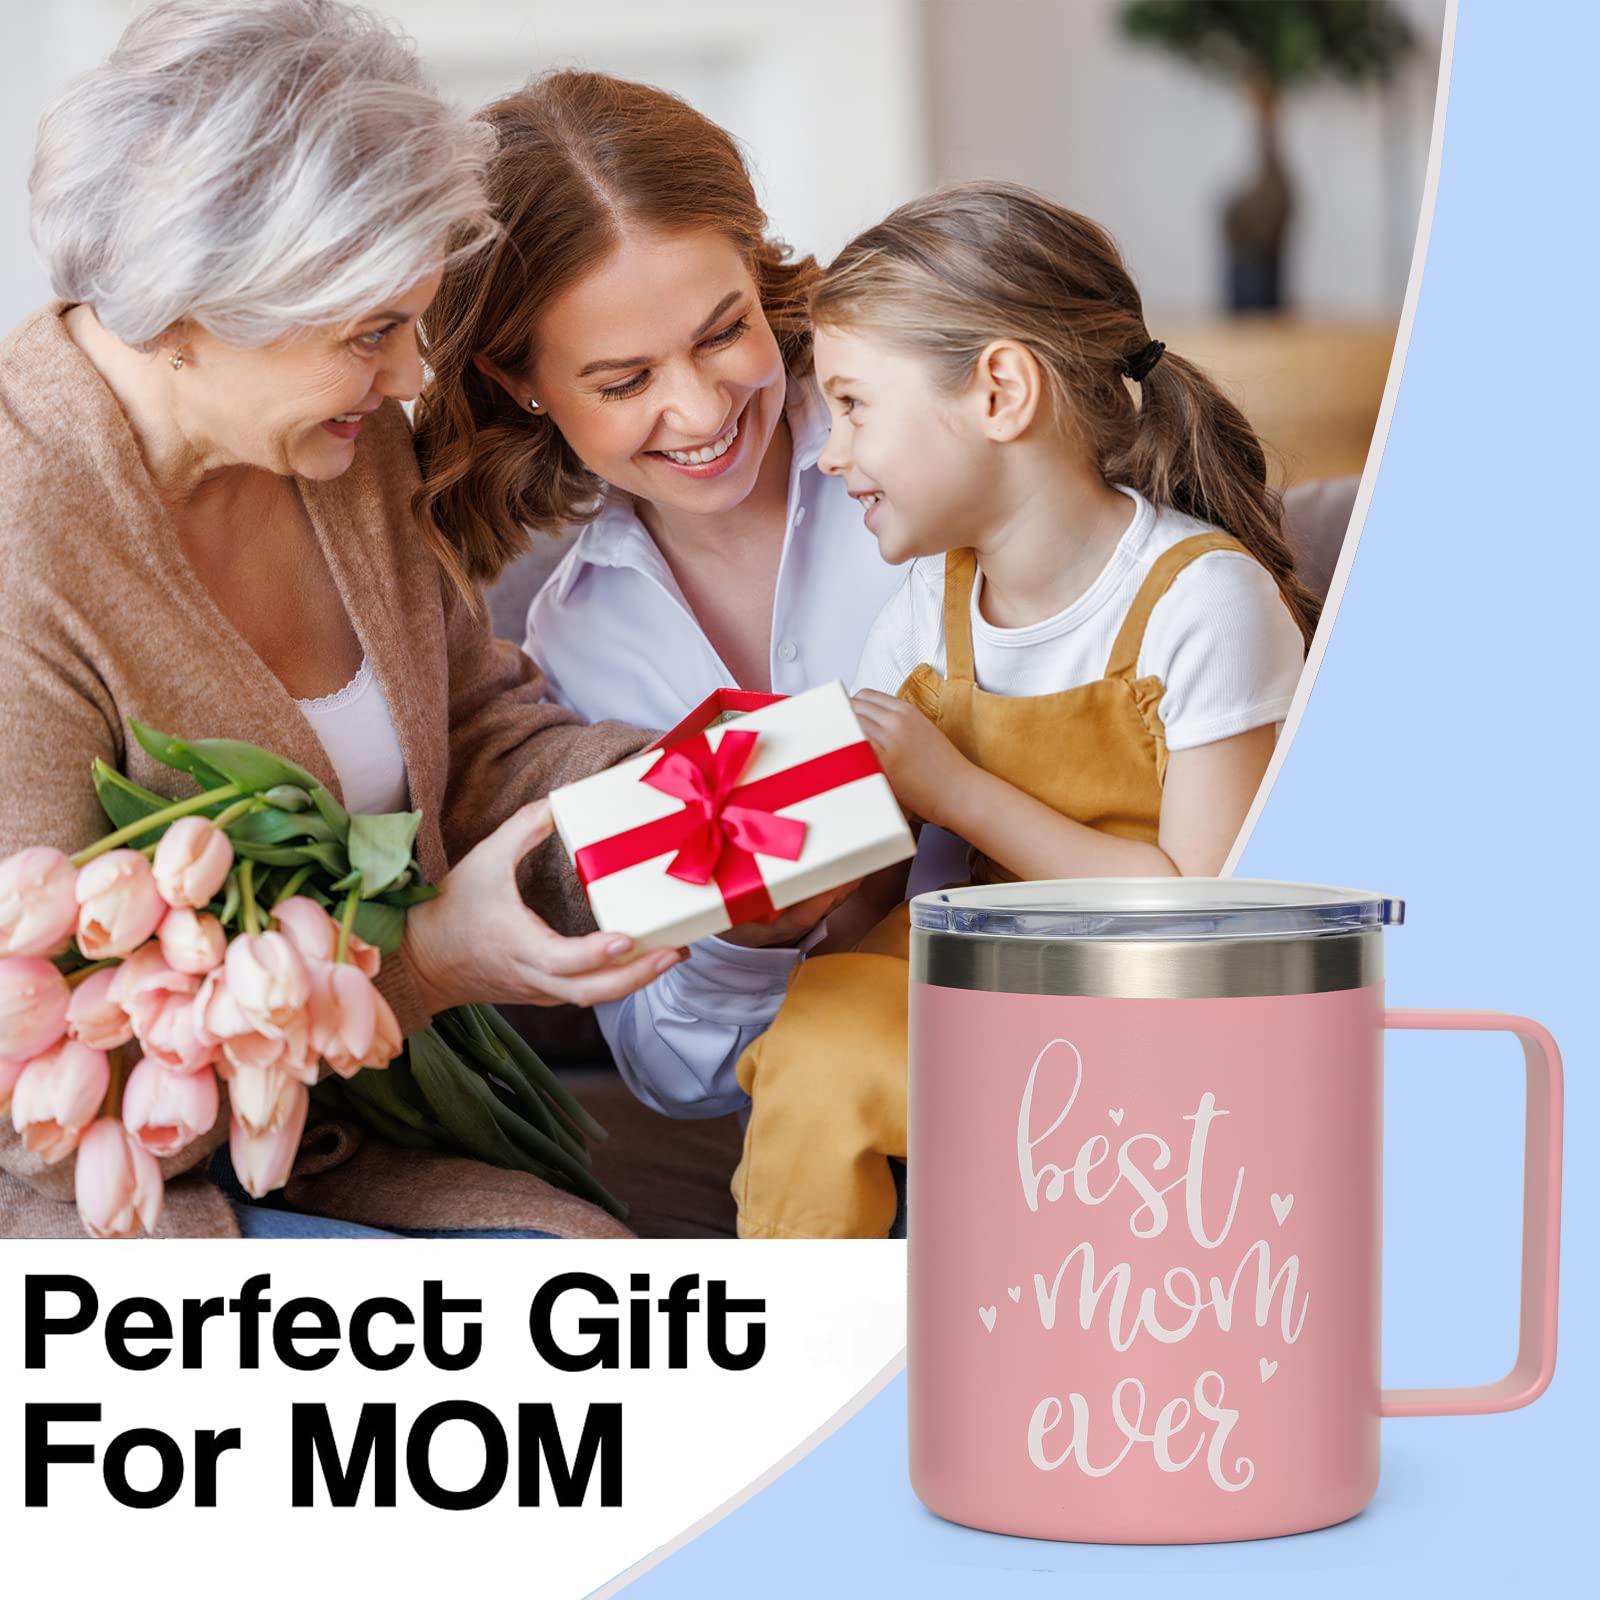 Best Mom Ever Coffee Mug- Best Mothers Day Gifts from Daughter,Son,Kids- Unique Christmas Gifts for Mom,Women,Wife- Novelty Birthday Gifts Idea for Mom